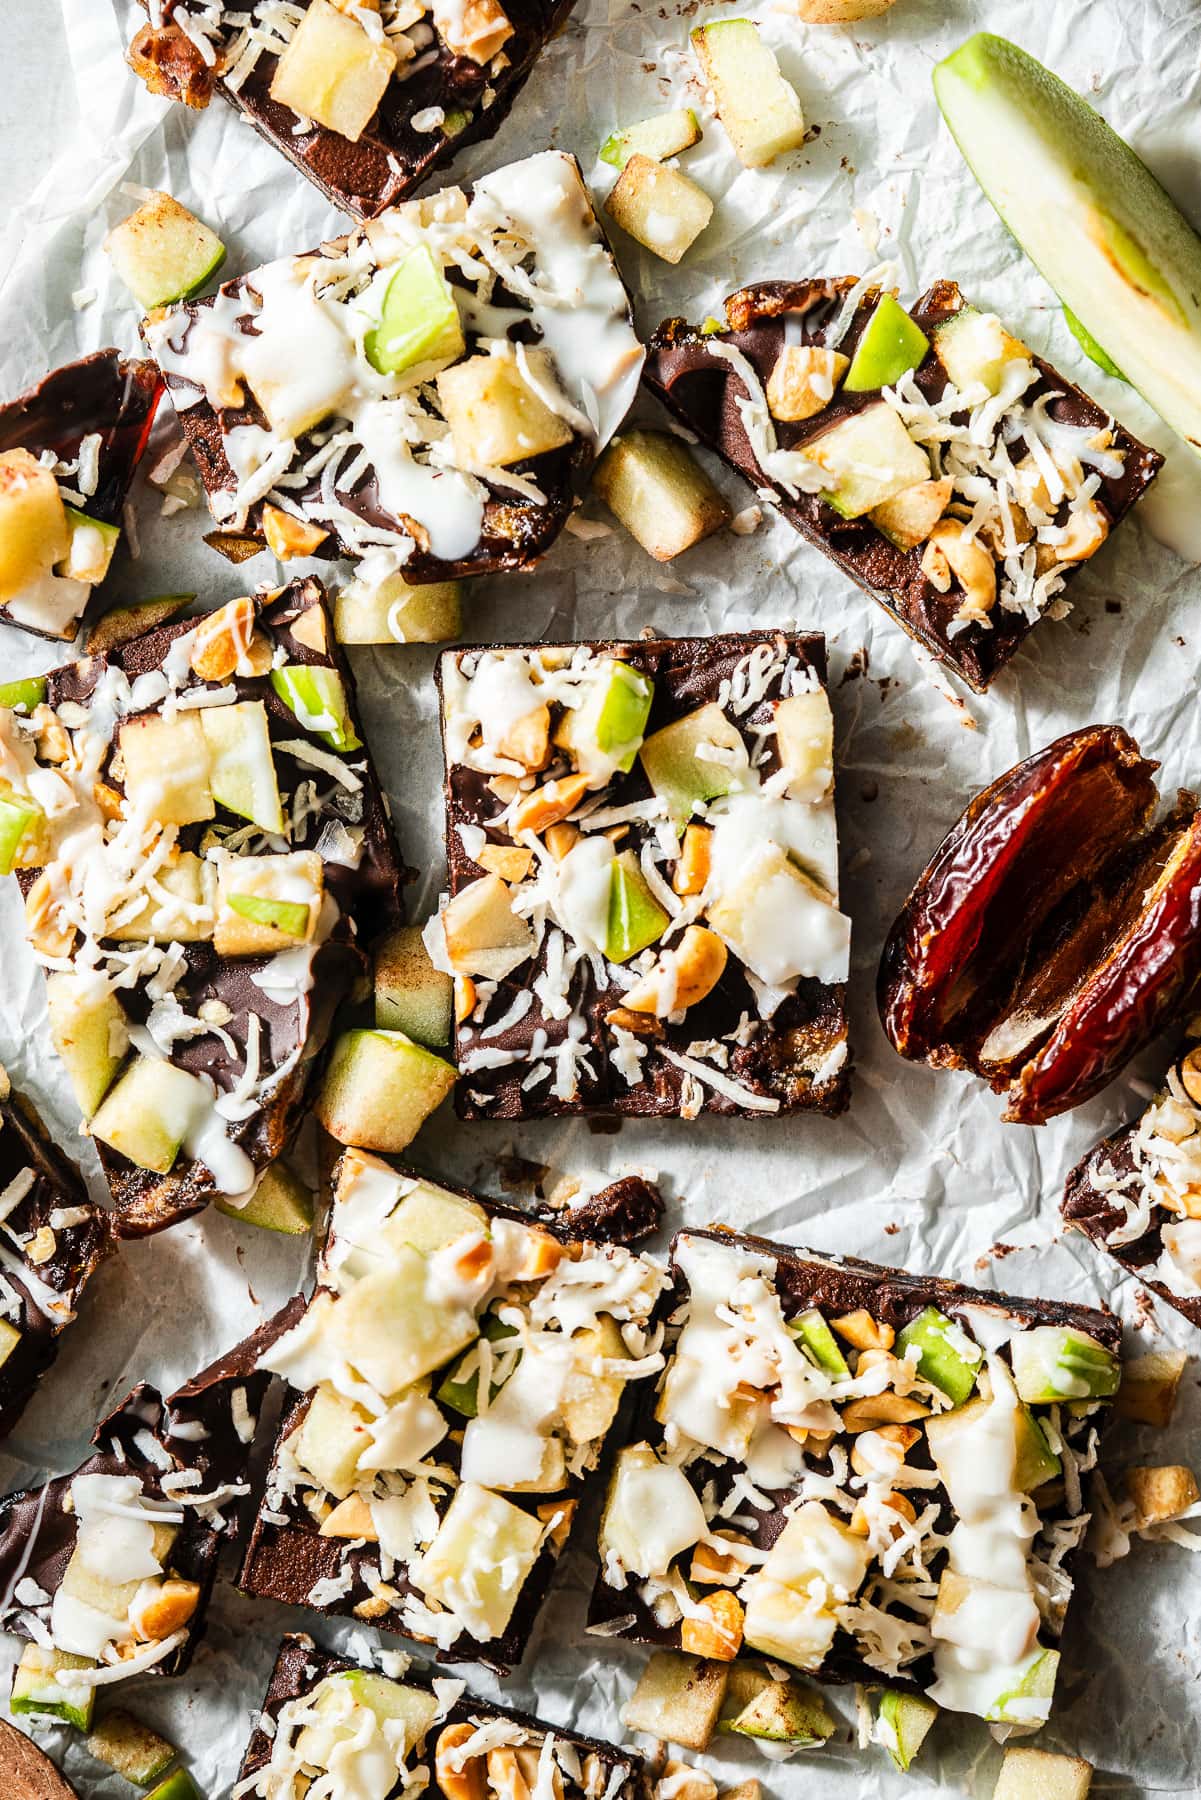 Slices of date bark with green apples and medjool dates.